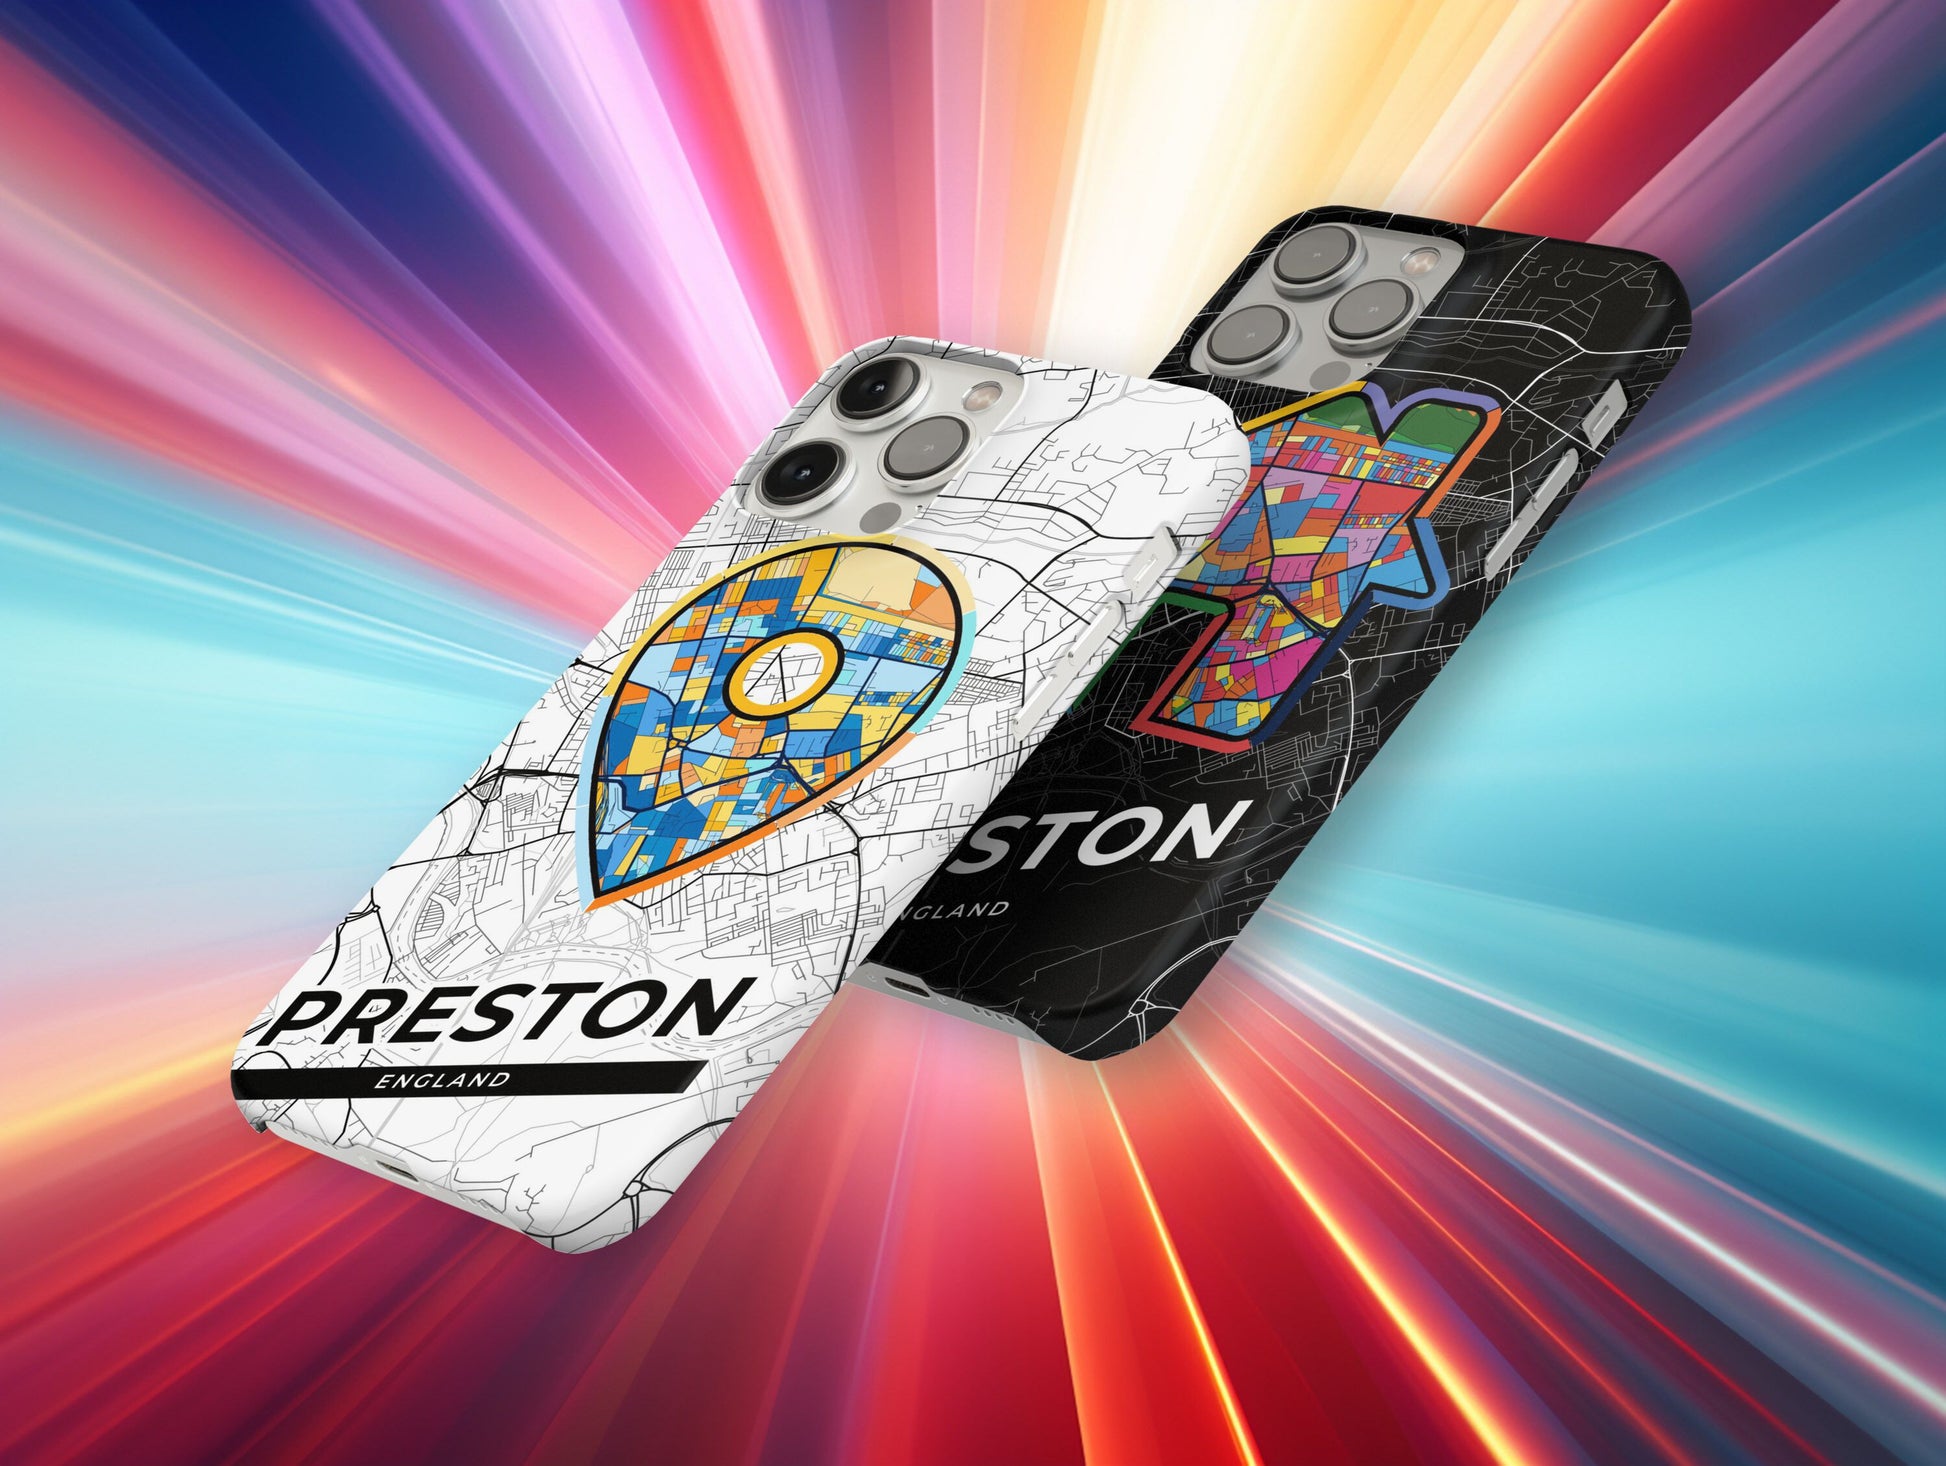 Preston England slim phone case with colorful icon. Birthday, wedding or housewarming gift. Couple match cases.